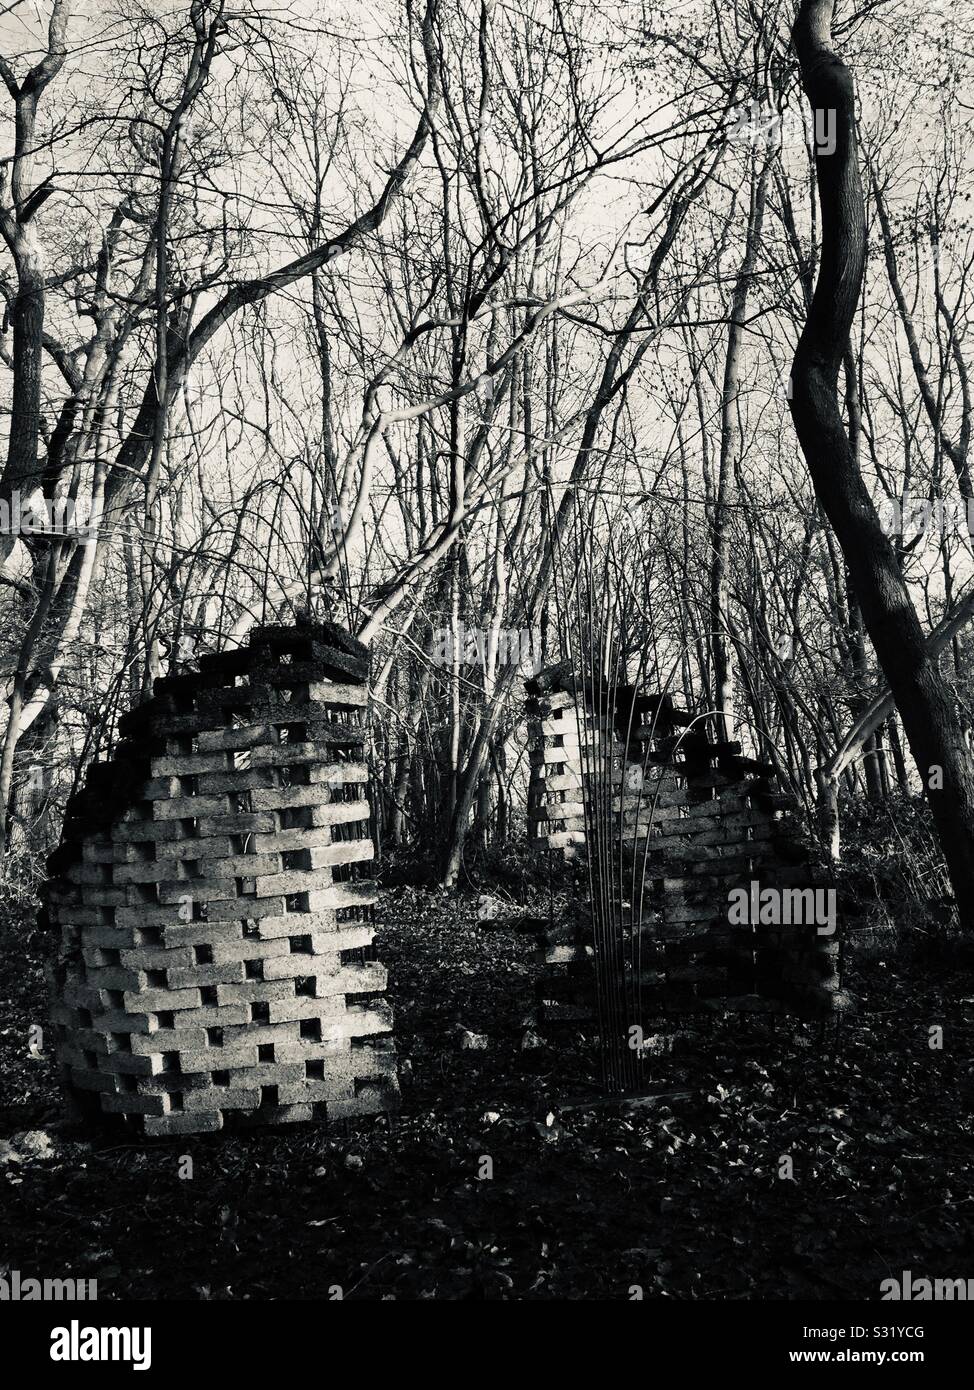 Sculpture in the woods made from biodegradable bricks Stock Photo